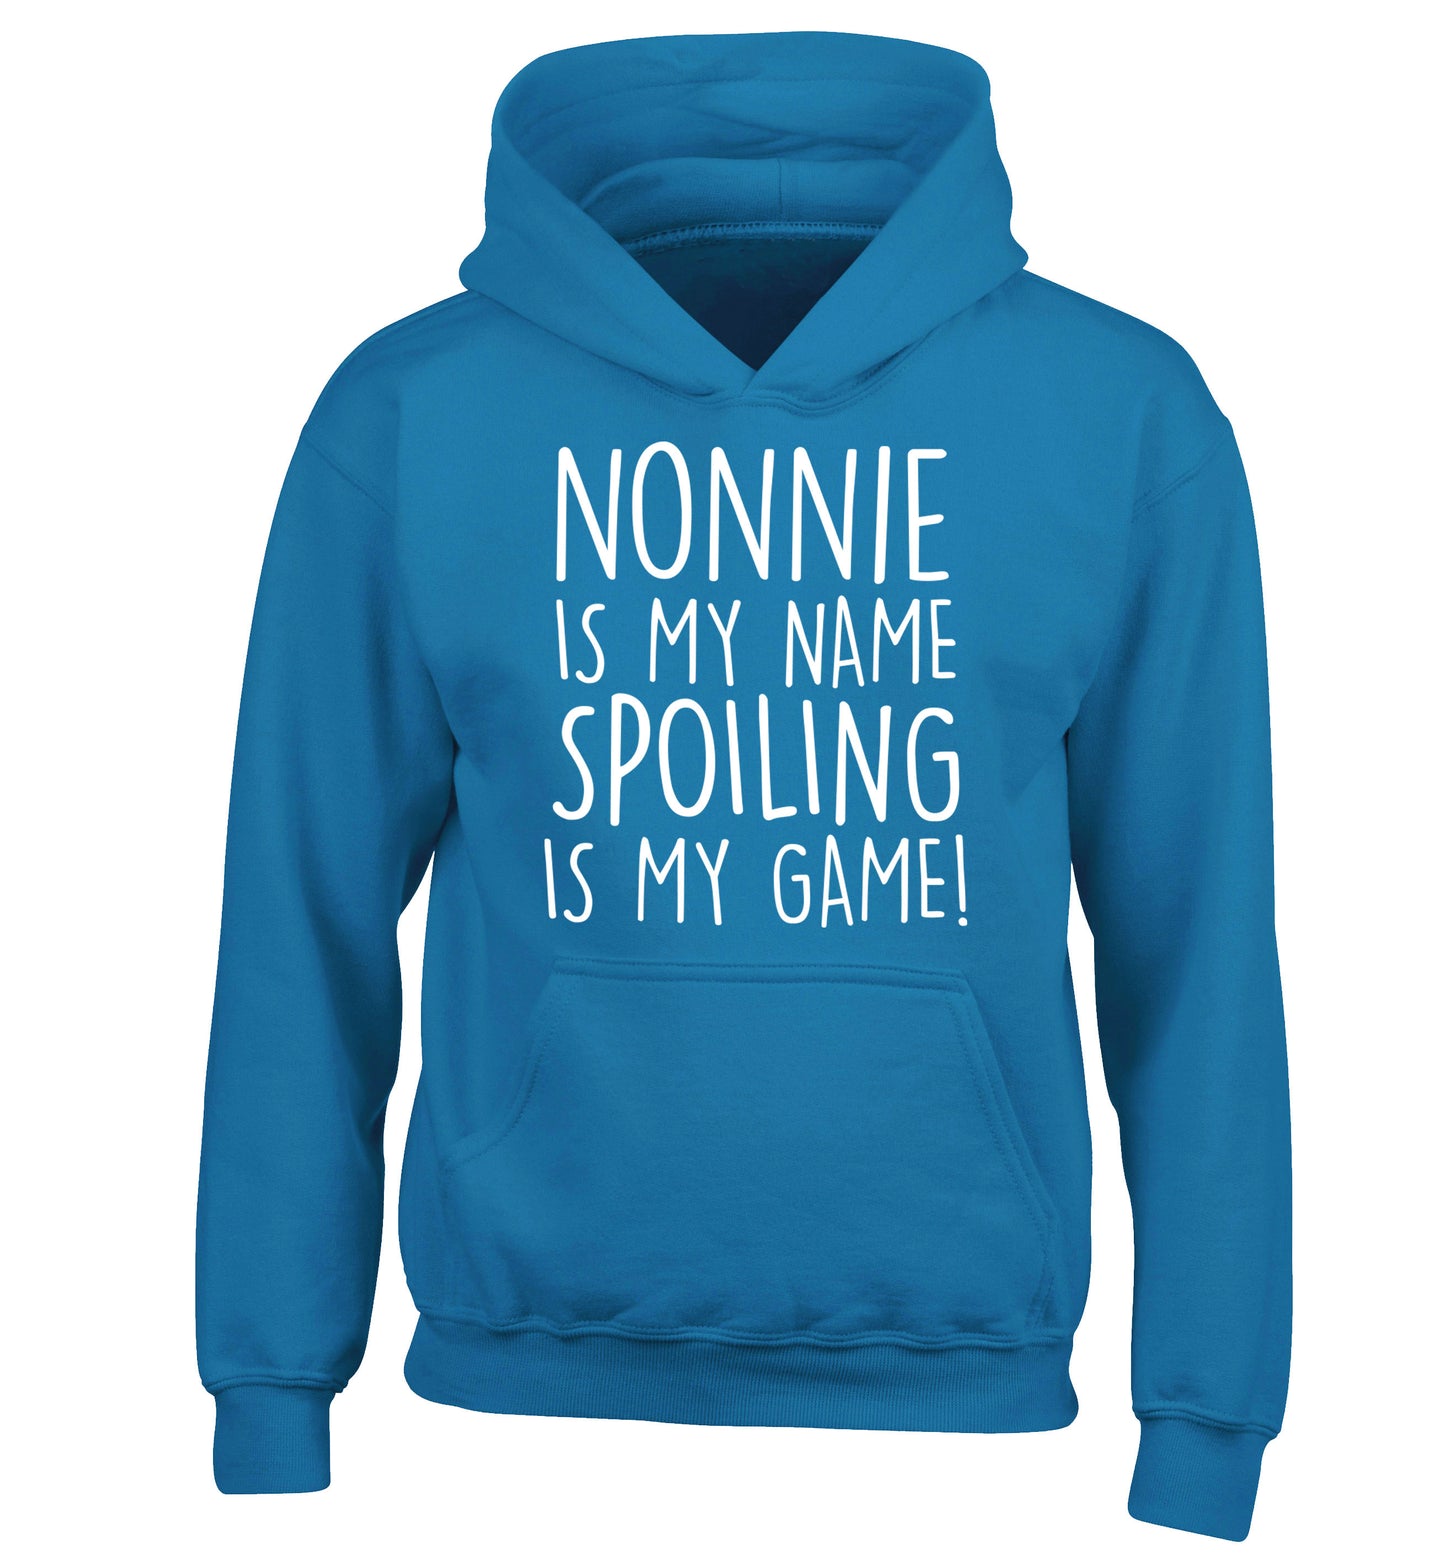 Nonnie is my name, spoiling is my game children's blue hoodie 12-14 Years